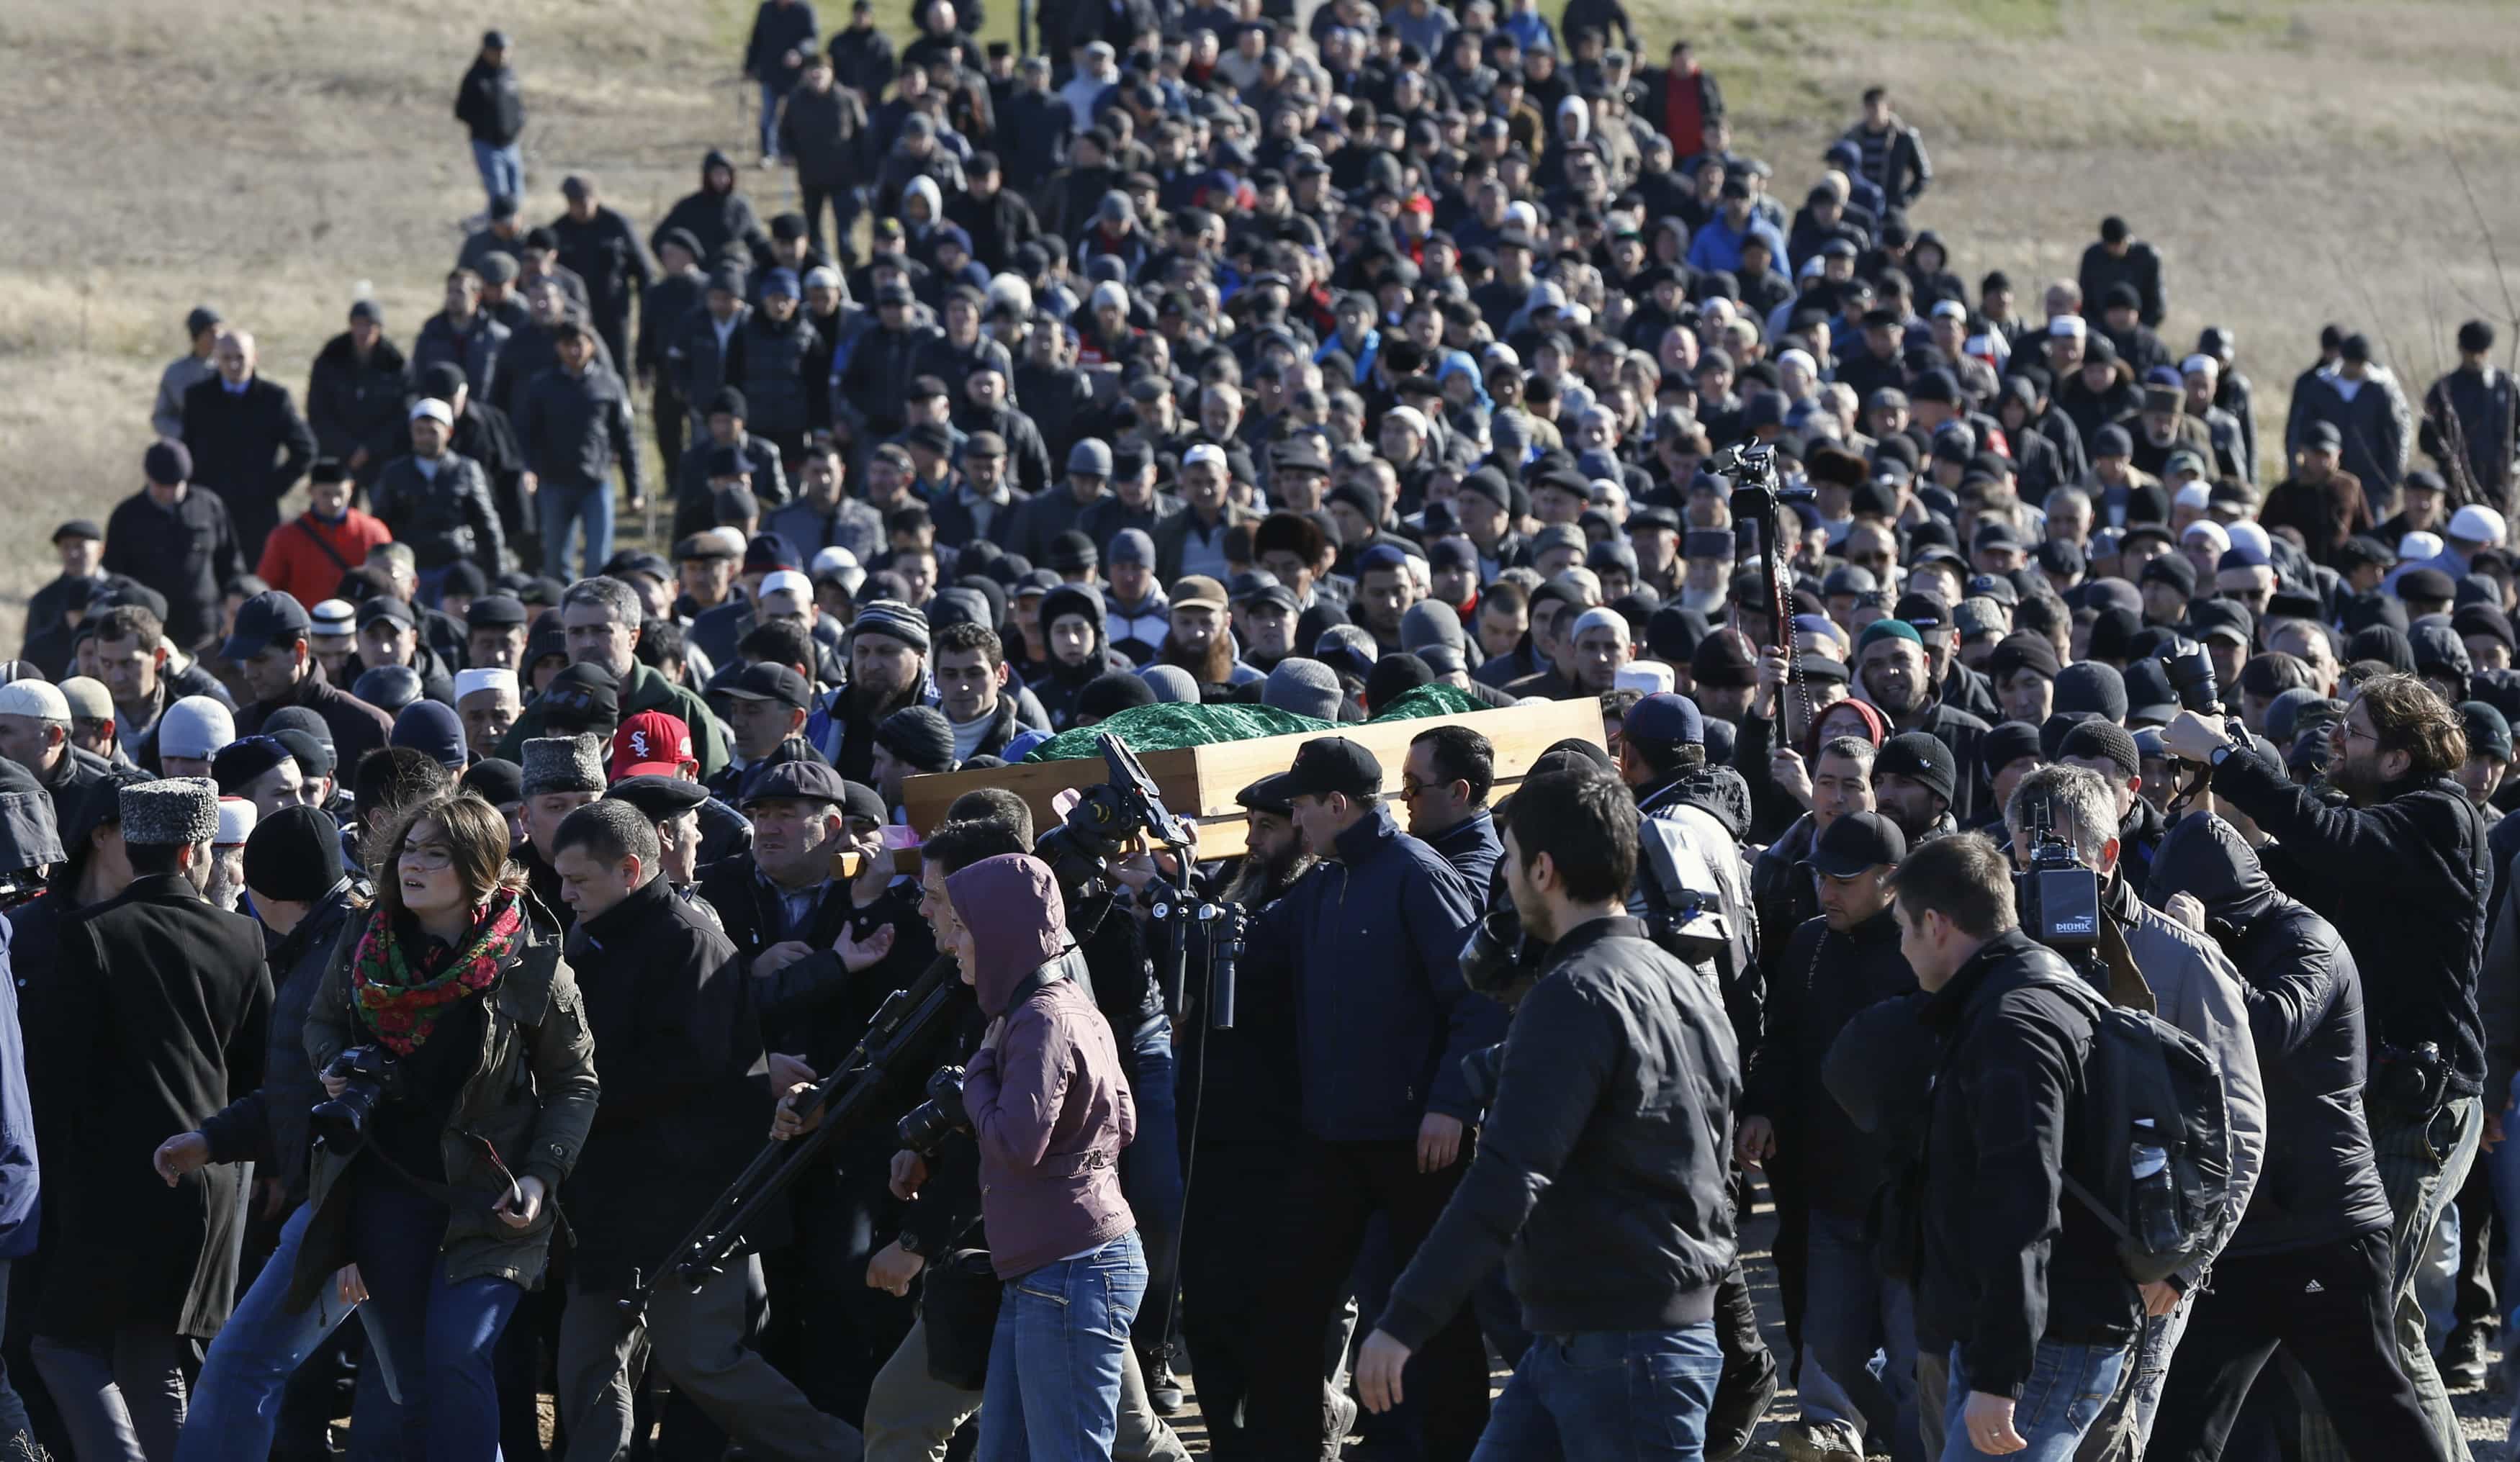 Crimean Tatars gather at a cemetery for the funeral of Reshat Ametov outside the town of Simferopol, 18 March 2014., REUTERS/Vasily Fedosenko